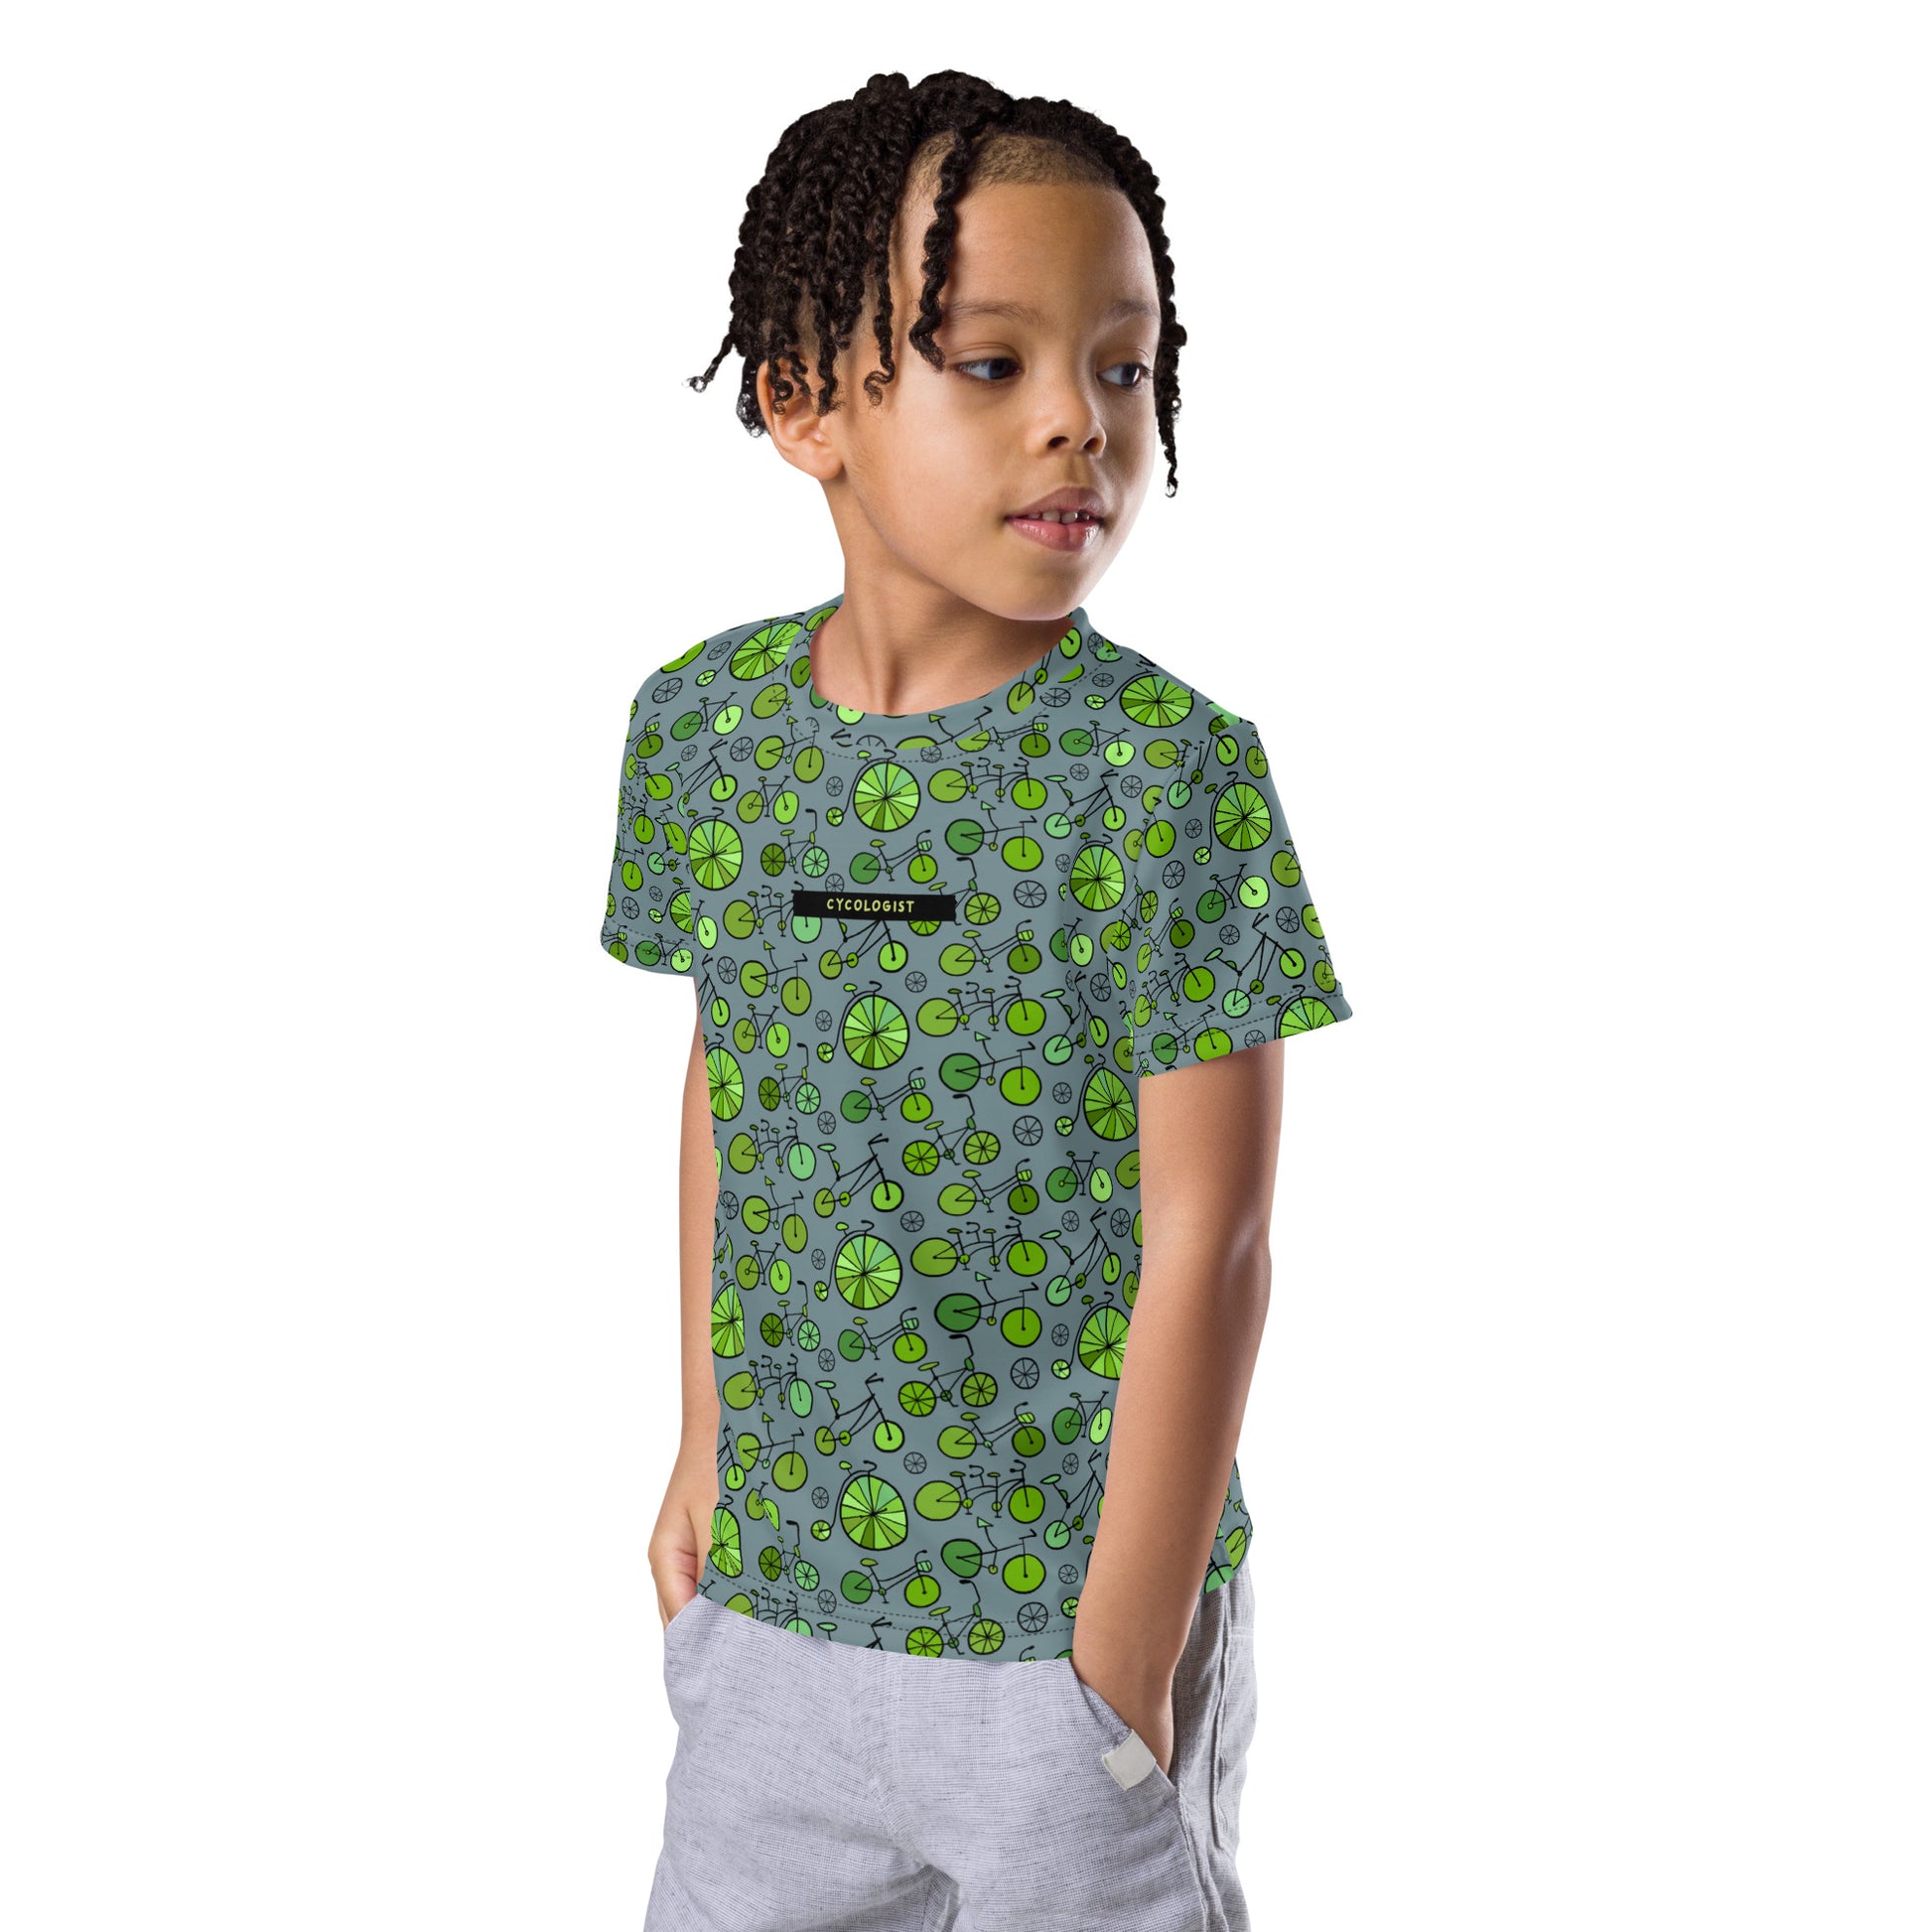 Boy in crew neck t-shirt with green bicycles collection on grey and personalised text (basic text - Cyclogist)